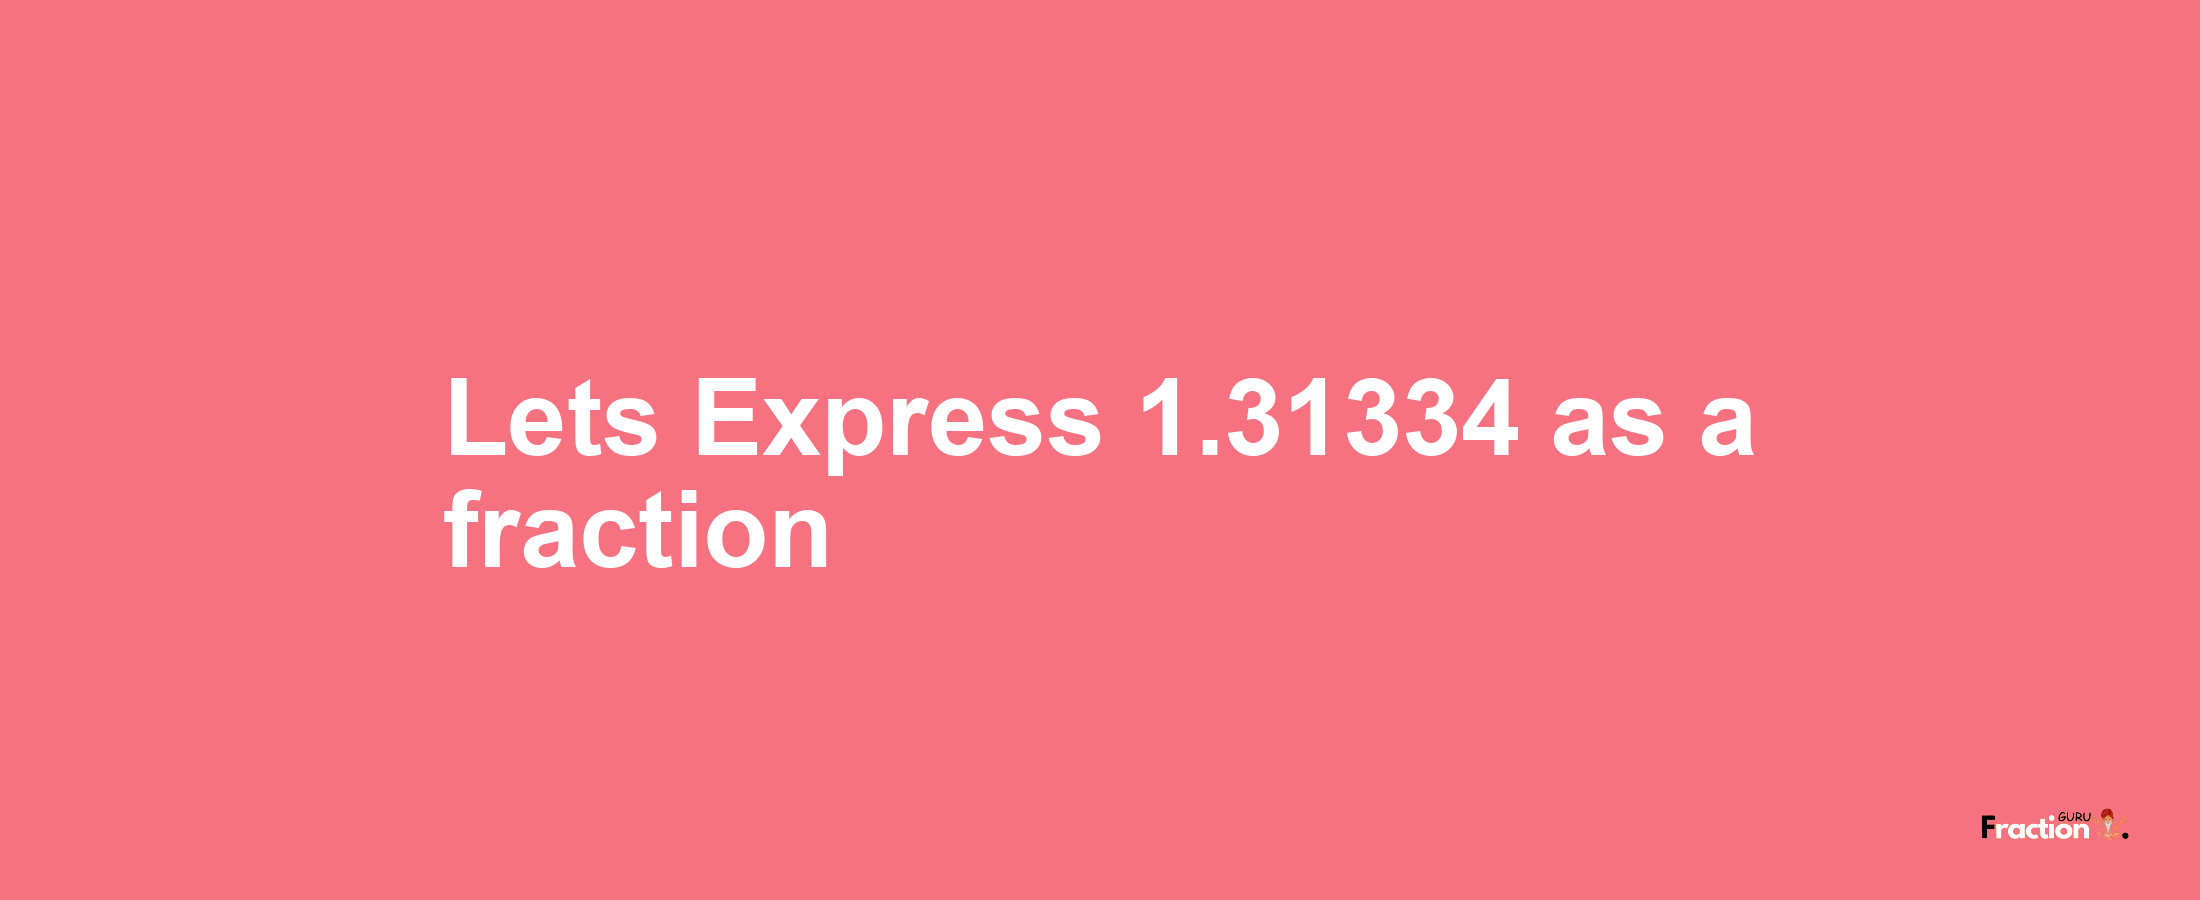 Lets Express 1.31334 as afraction